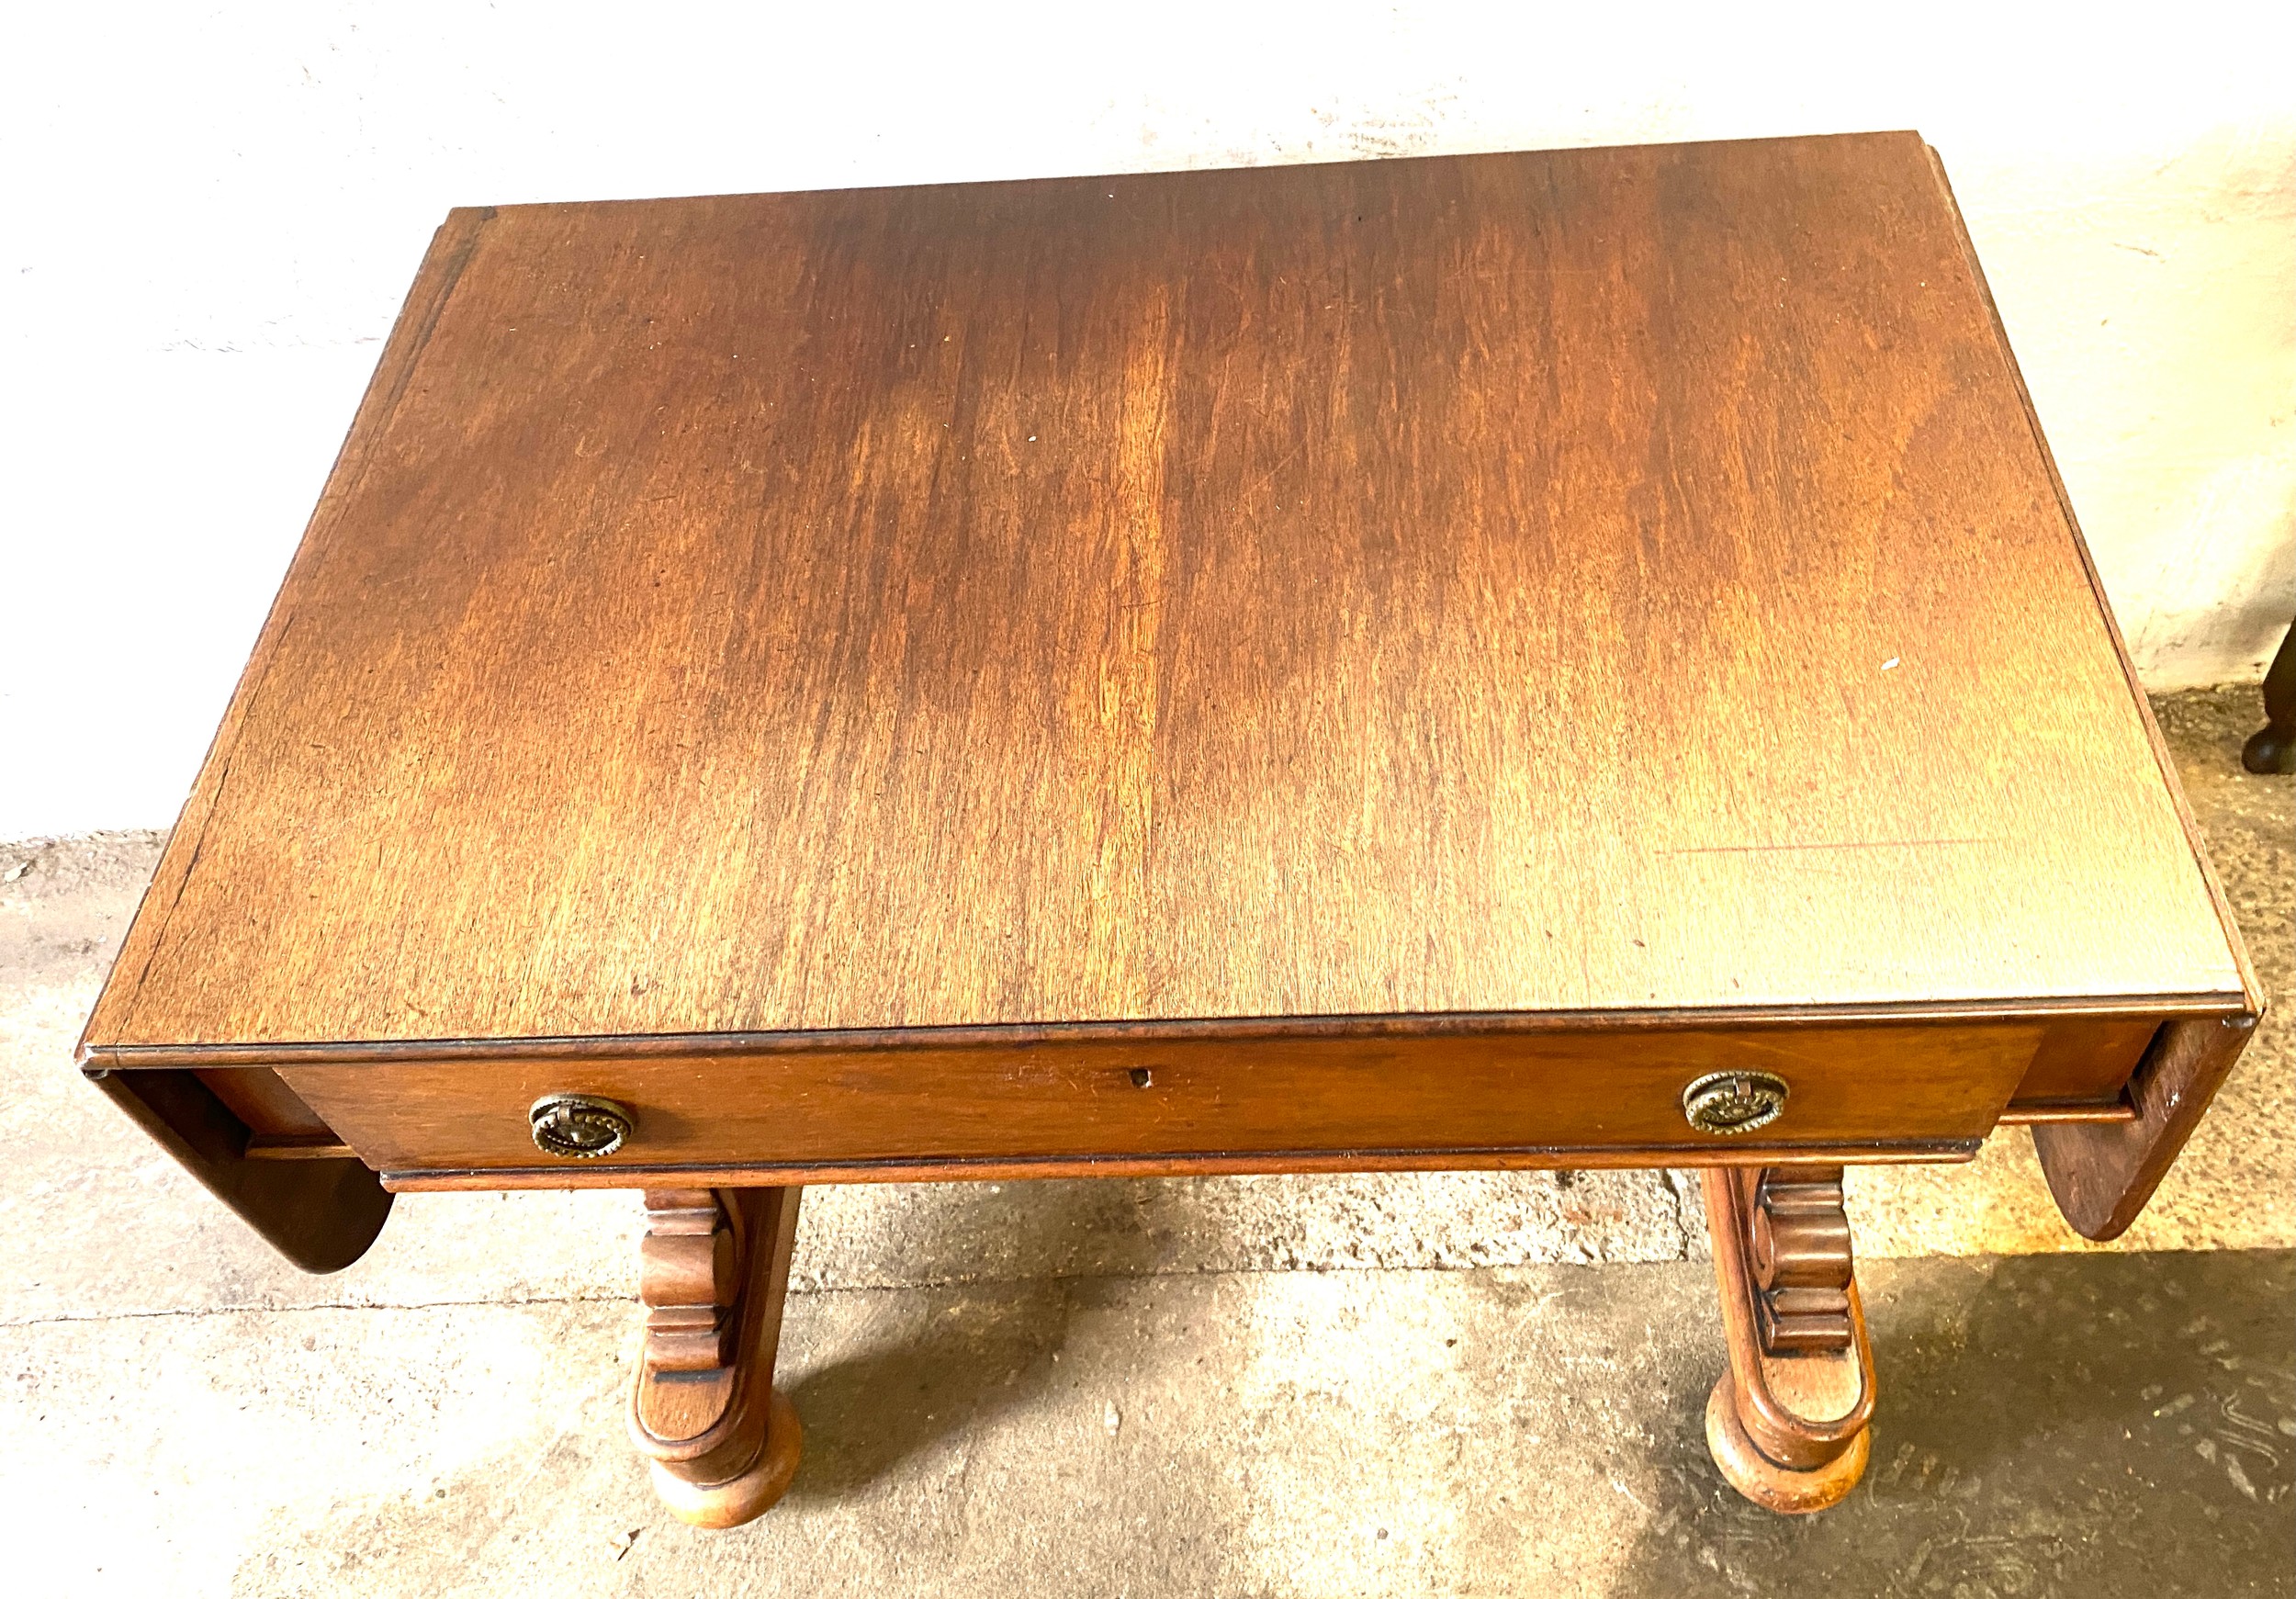 Antique 1 drawer Mahogany sofa table measures approx 29 inches 20.5 inches wide 31incehs long - Image 2 of 3